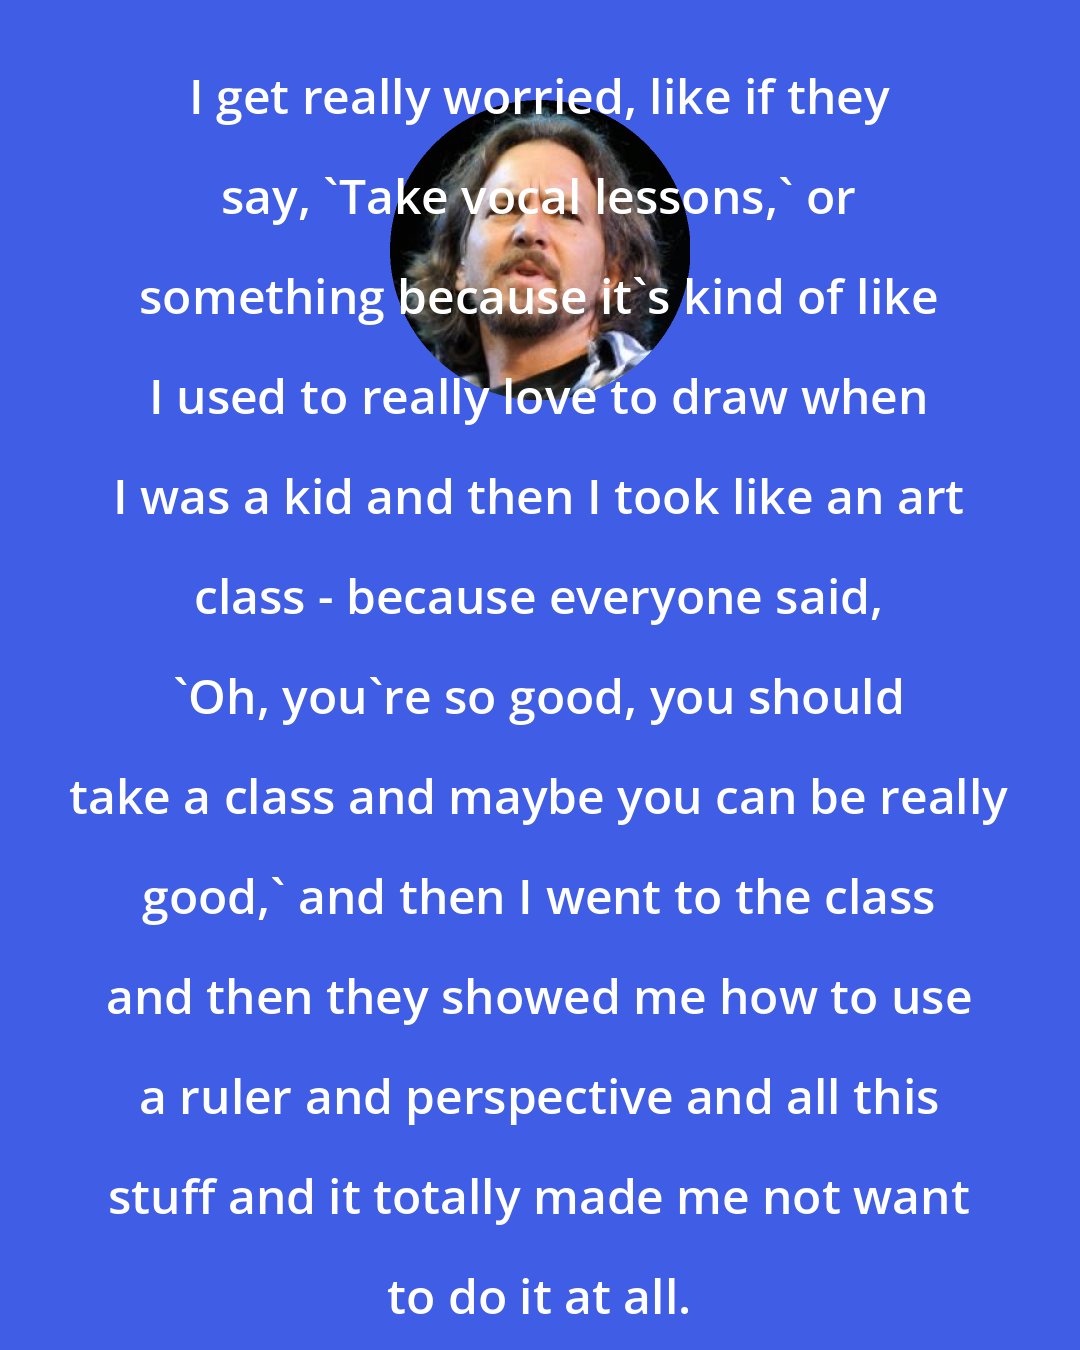 Eddie Vedder: I get really worried, like if they say, 'Take vocal lessons,' or something because it's kind of like I used to really love to draw when I was a kid and then I took like an art class - because everyone said, 'Oh, you're so good, you should take a class and maybe you can be really good,' and then I went to the class and then they showed me how to use a ruler and perspective and all this stuff and it totally made me not want to do it at all.